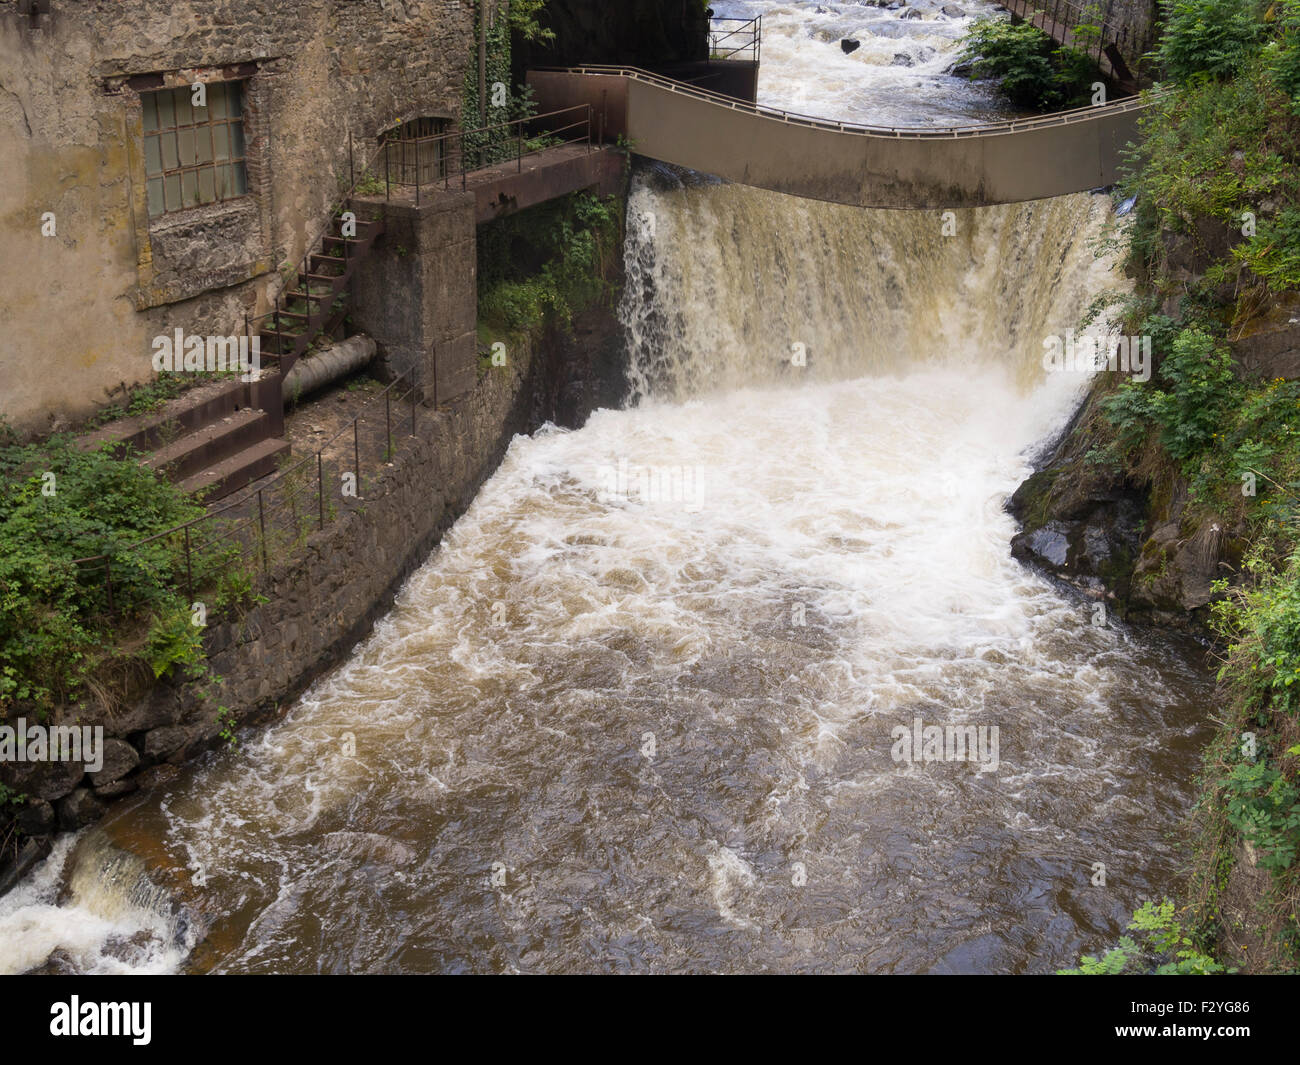 Site of the factories Valley, on the river La Durolle in the town of Thiers, Auvergne France. Stock Photo